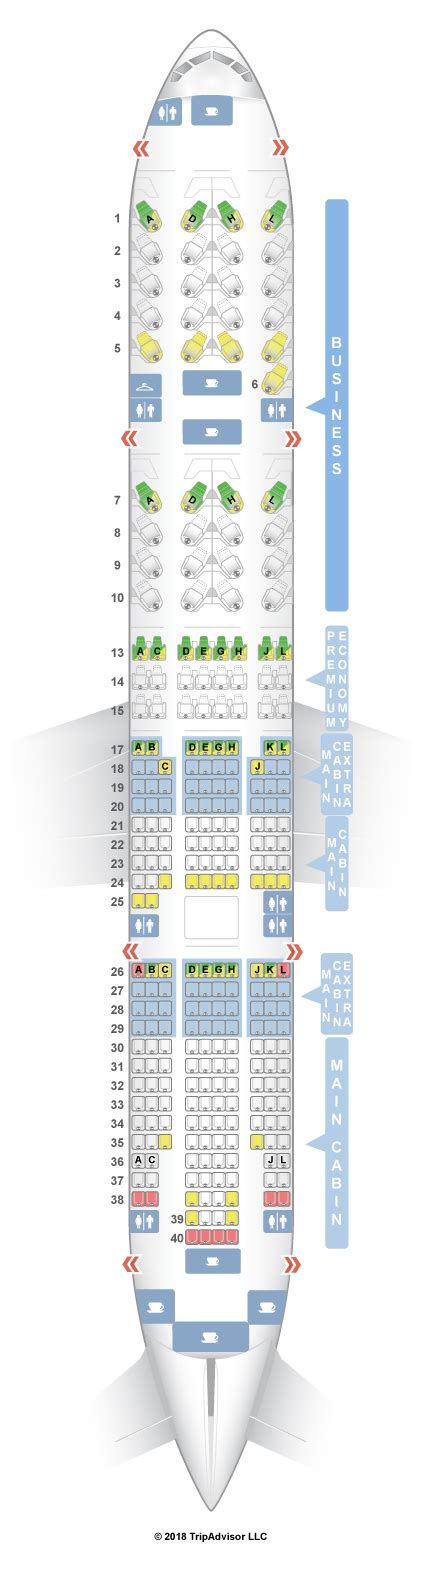 Premium seat. Crew seat. Power port. Emergency exit. Galley. Lavatory. Closet. Bassinet. For your next Asiana flight, use this seating chart to get the most comfortable seats, legroom, and recline on .